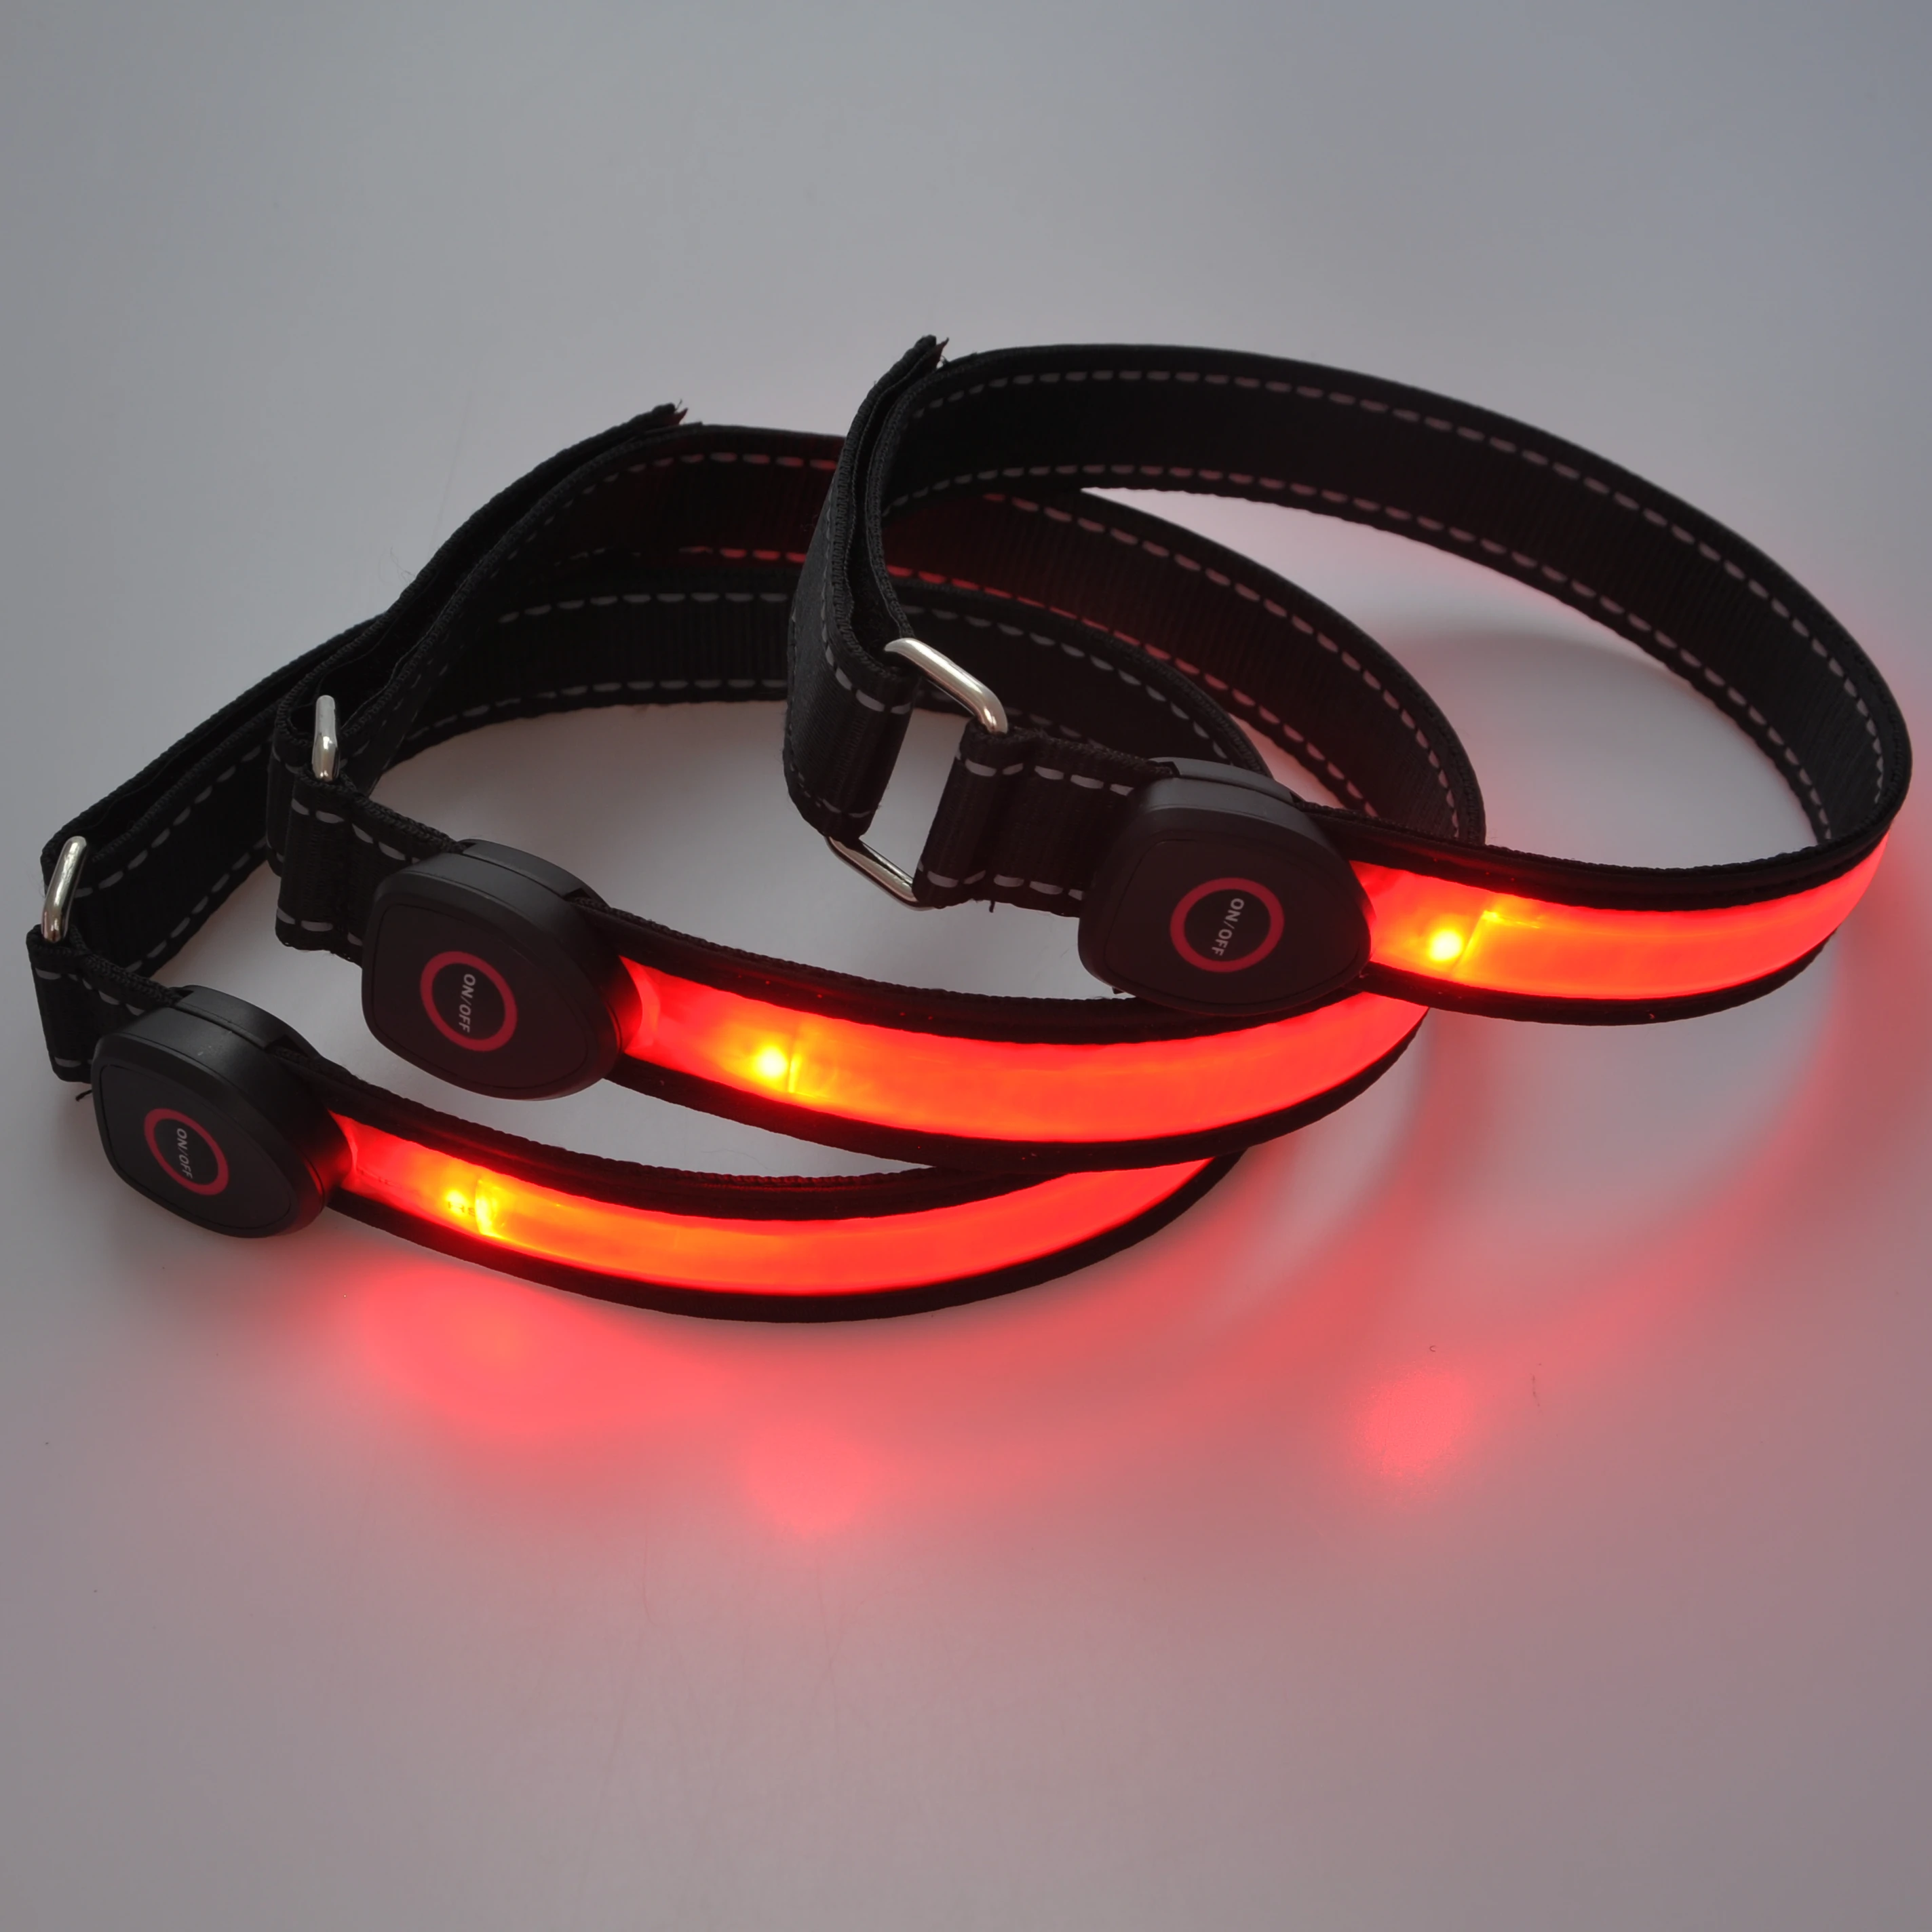 

High Quality Glow in The Dark USB rechargeable LED Armband for Running/Cycling